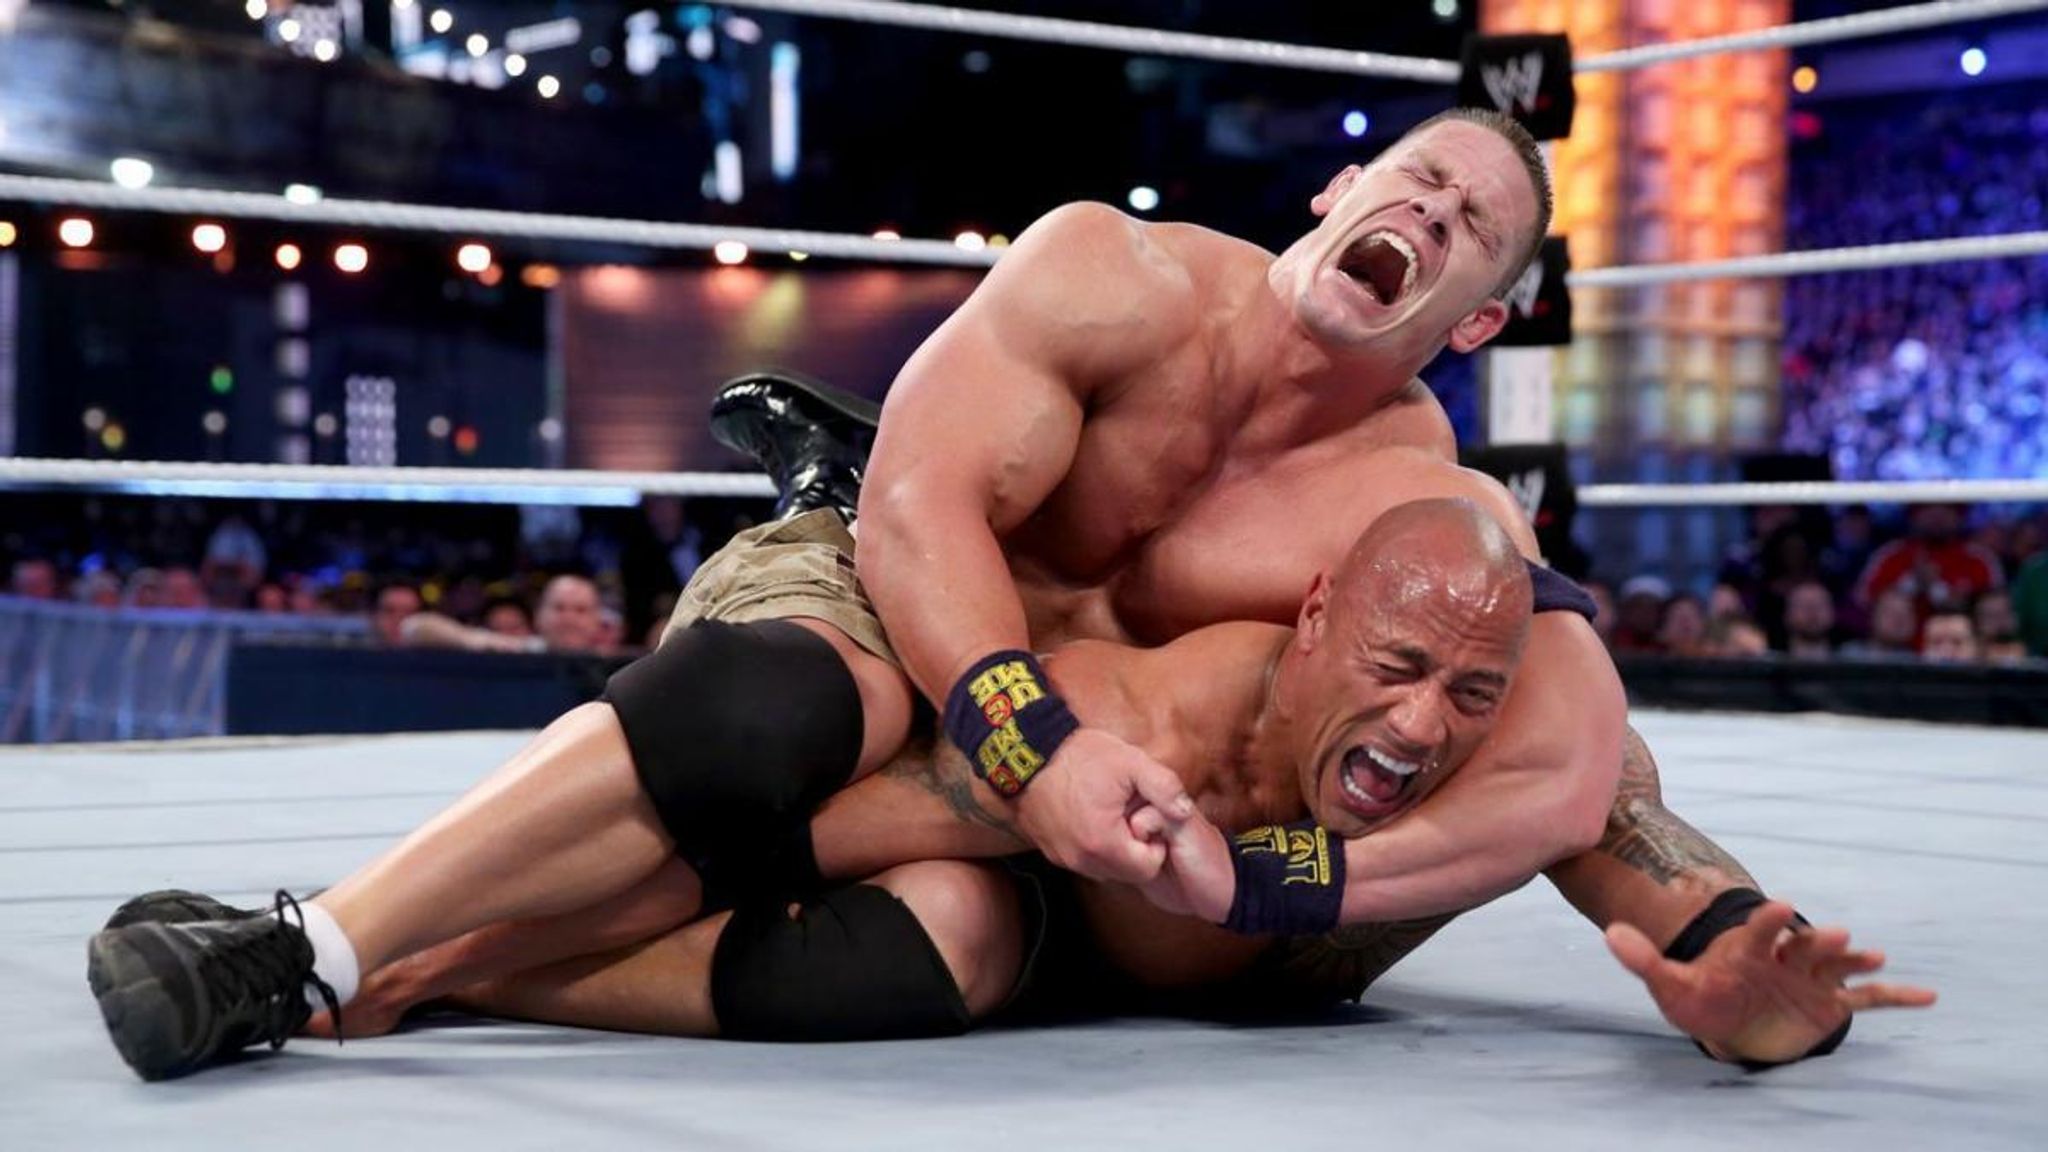 The Camera Suddenly Captured The Moment The Rock And John Cena Shared A Beautiful Moment Together At Wwe Smackdown - Daily USA News